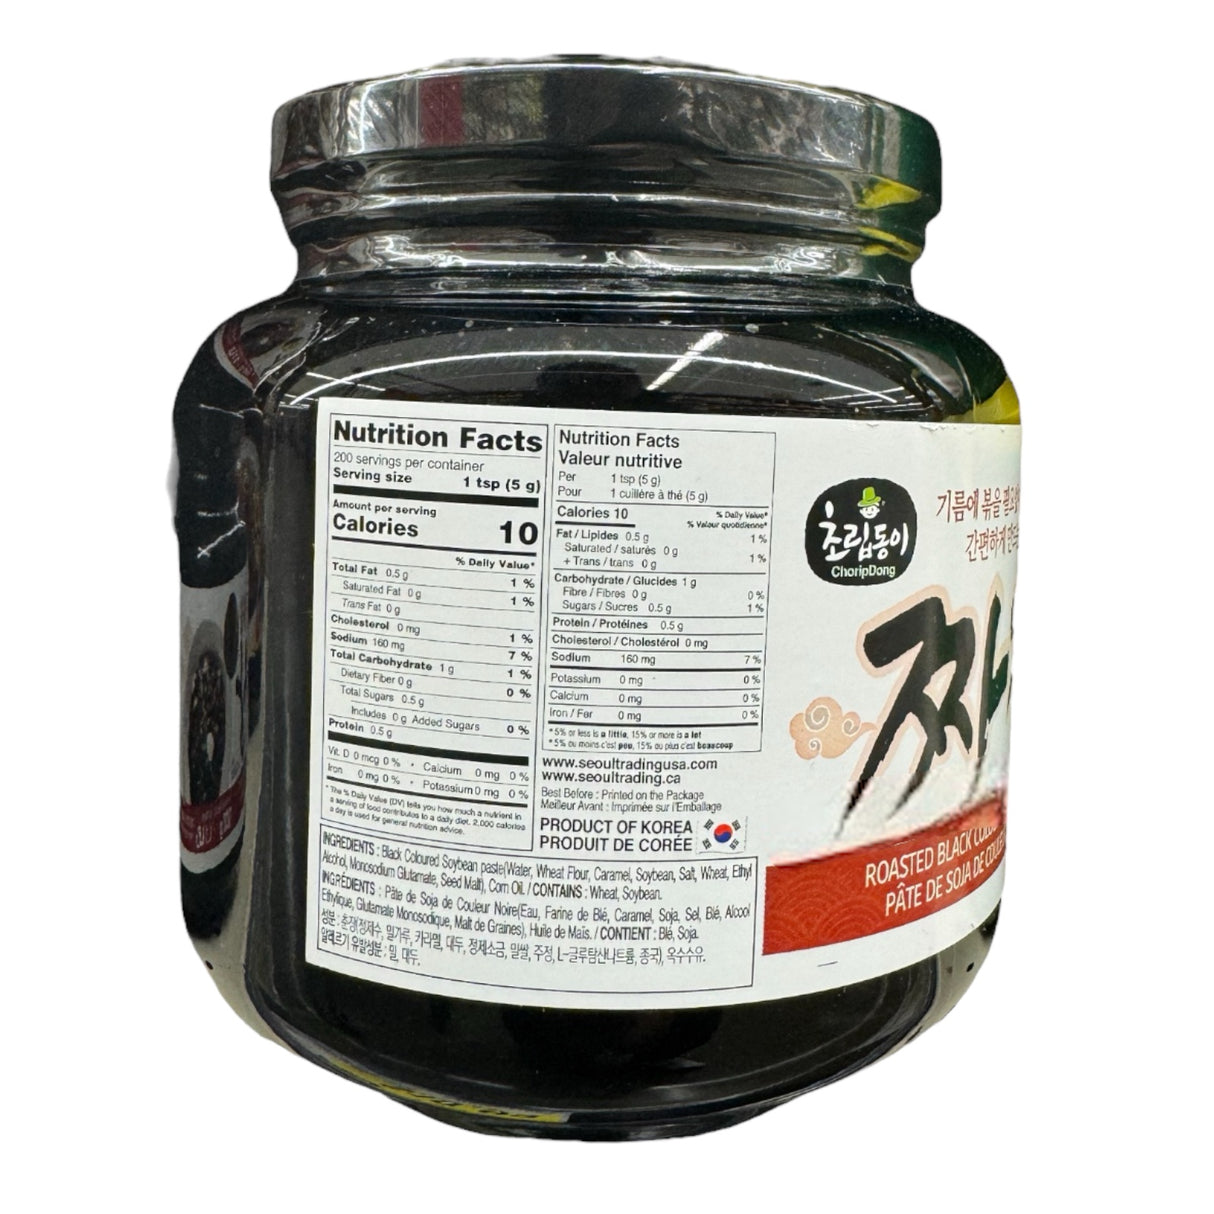 ChoripDong Roasted Black Coloured Soybean Paste